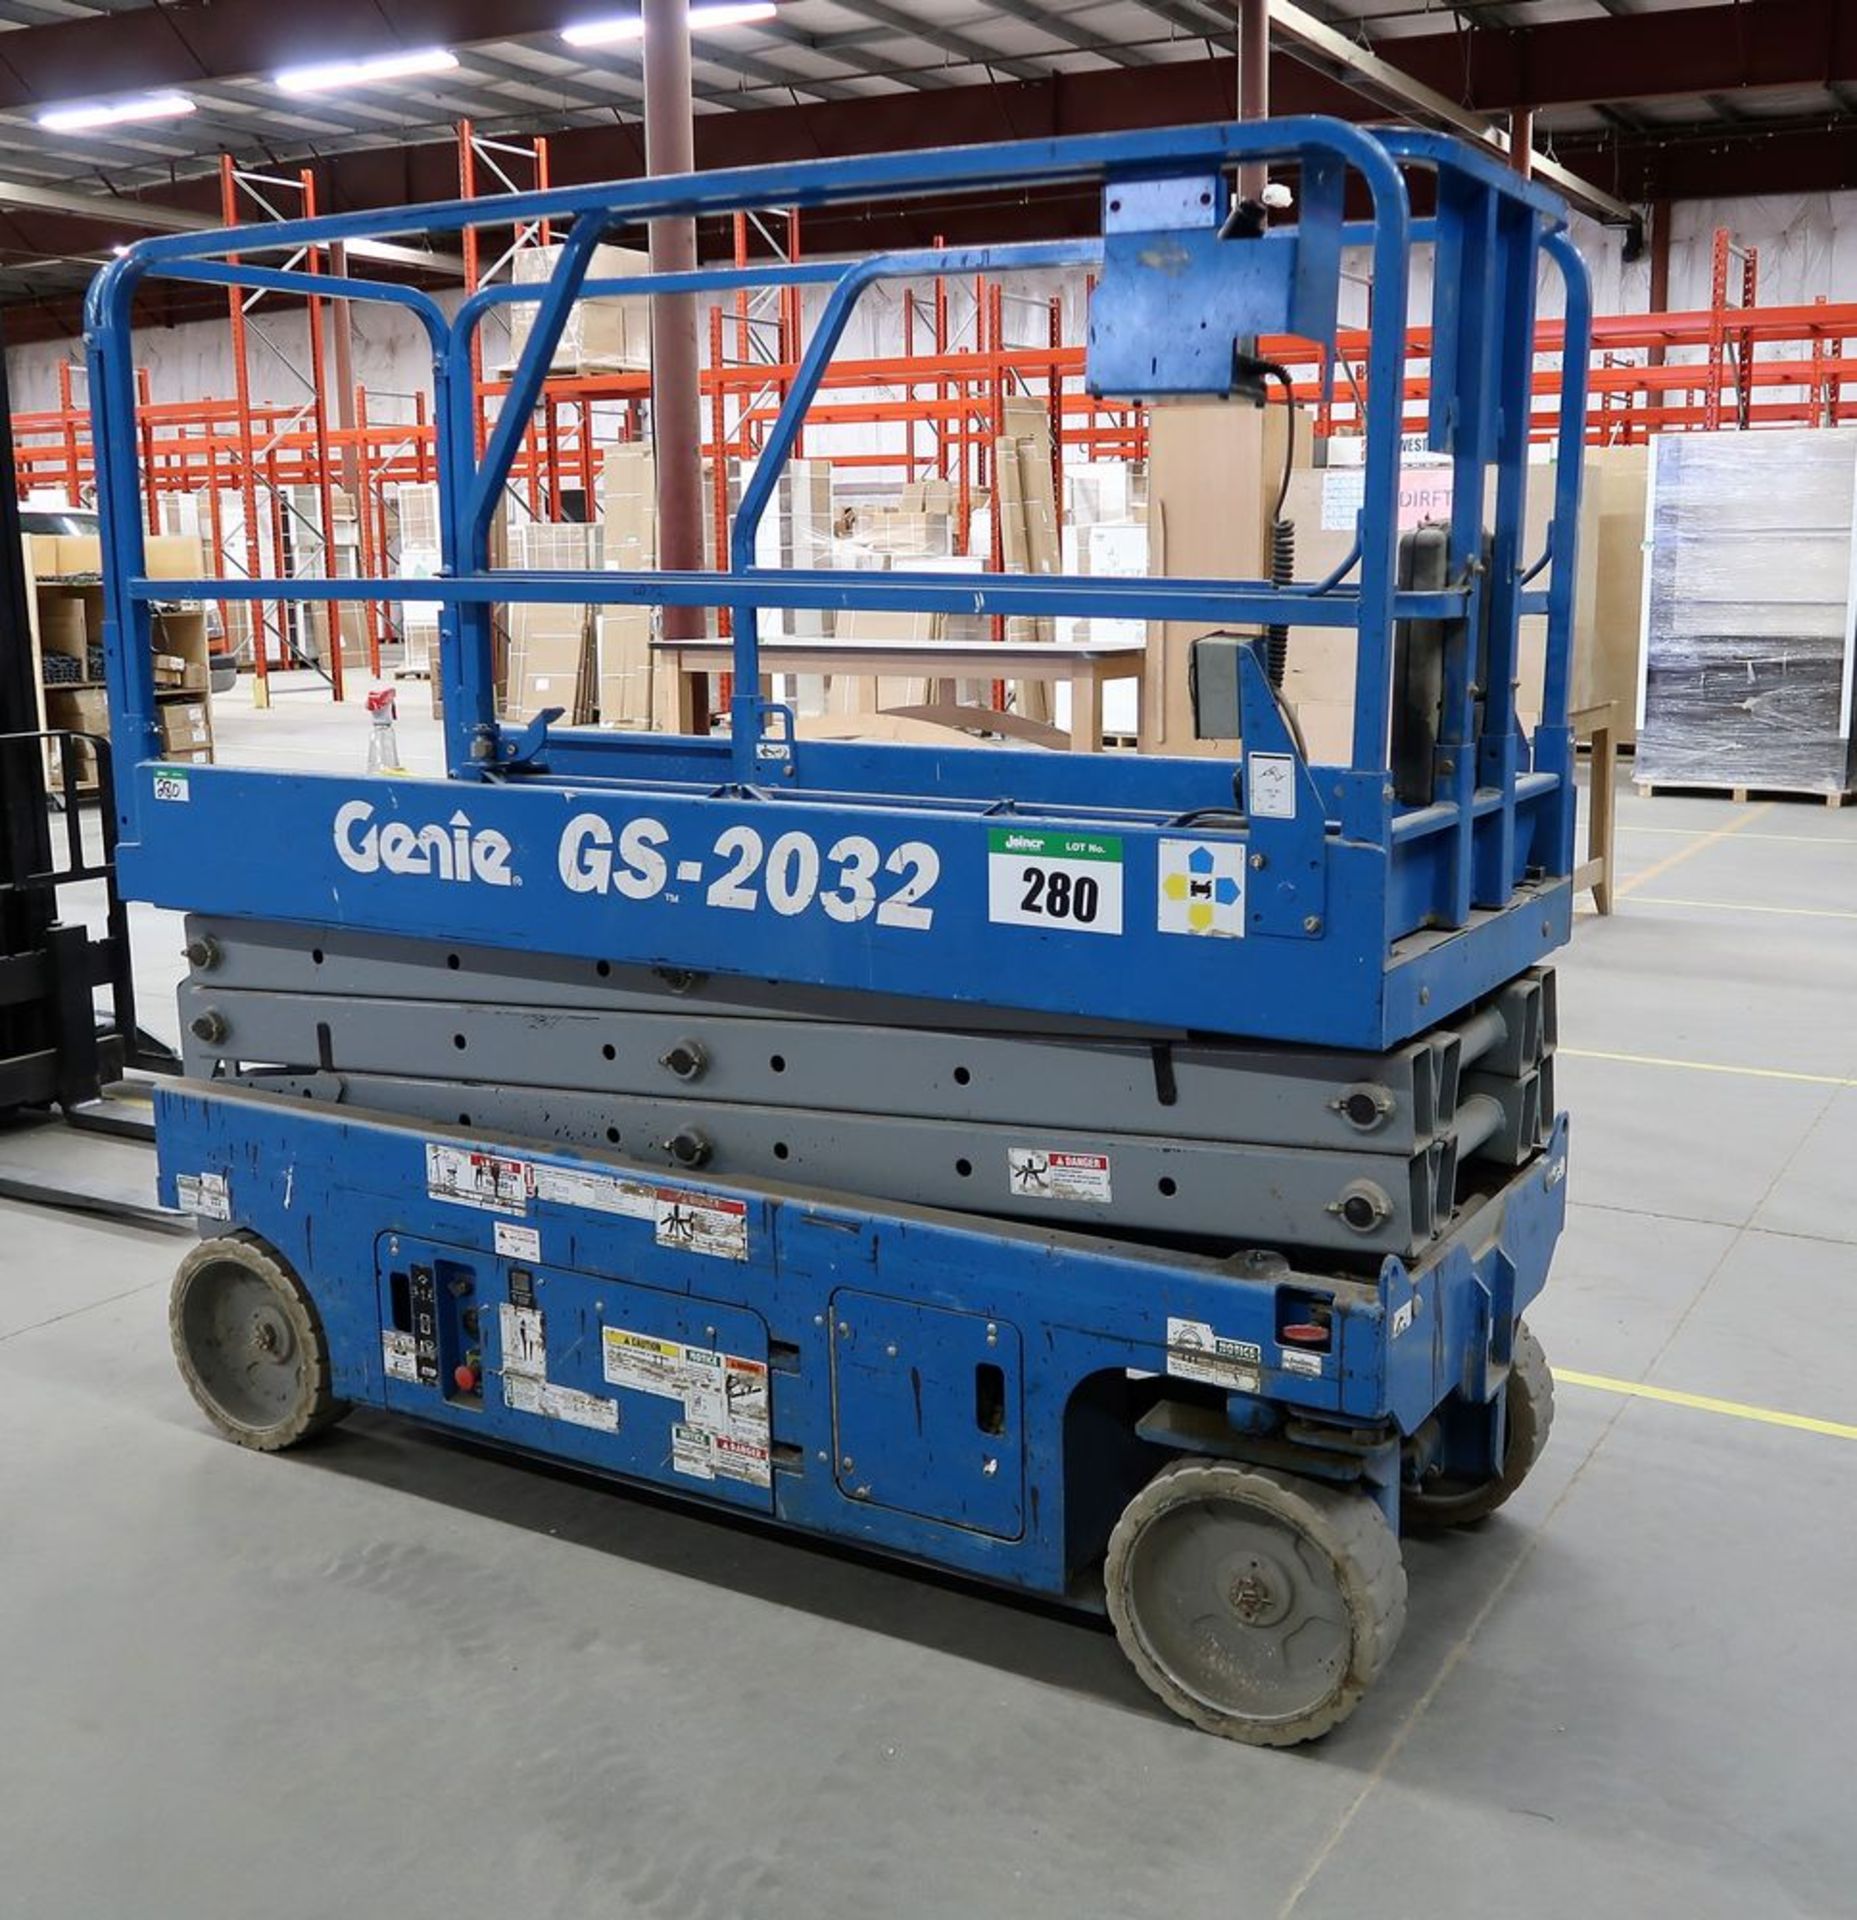 GENIE GS-2032, MANLIFT S/N 653206-80506, 611 HRS., 20' PLATFORM HEIGHT, 32"W, 800LB CAP. - Image 2 of 8